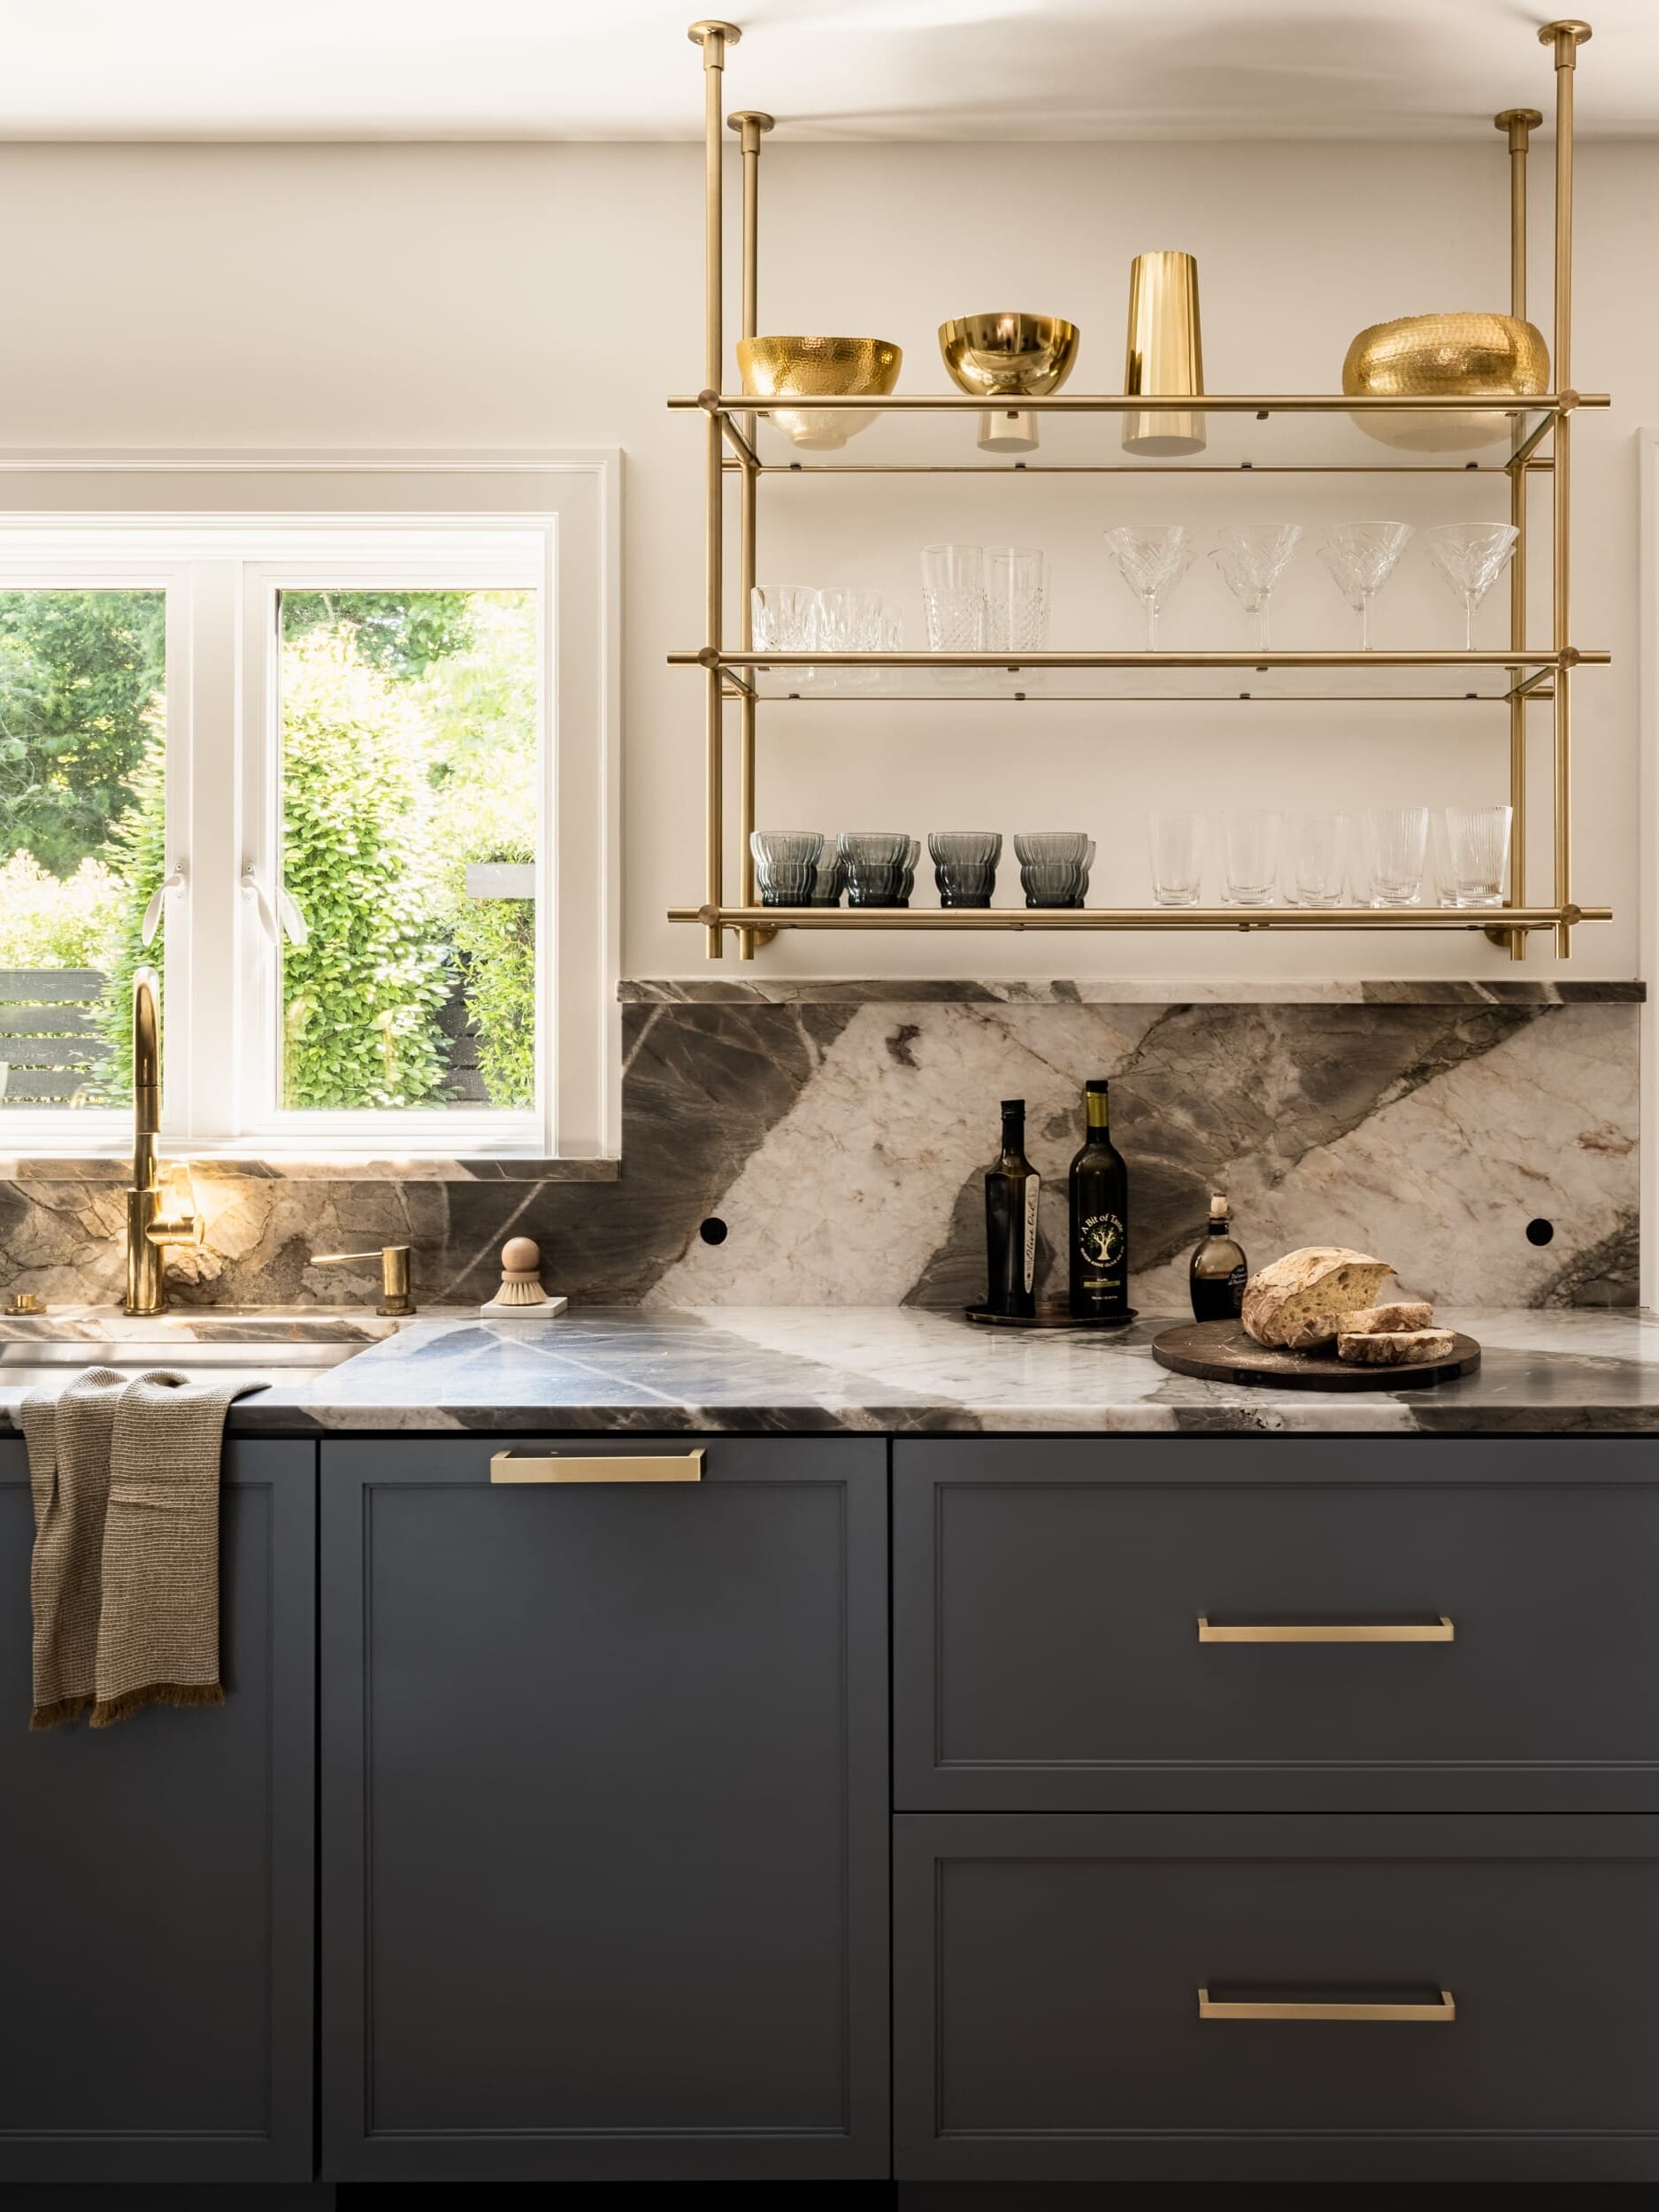 A black and gold kitchen with marble counter tops.